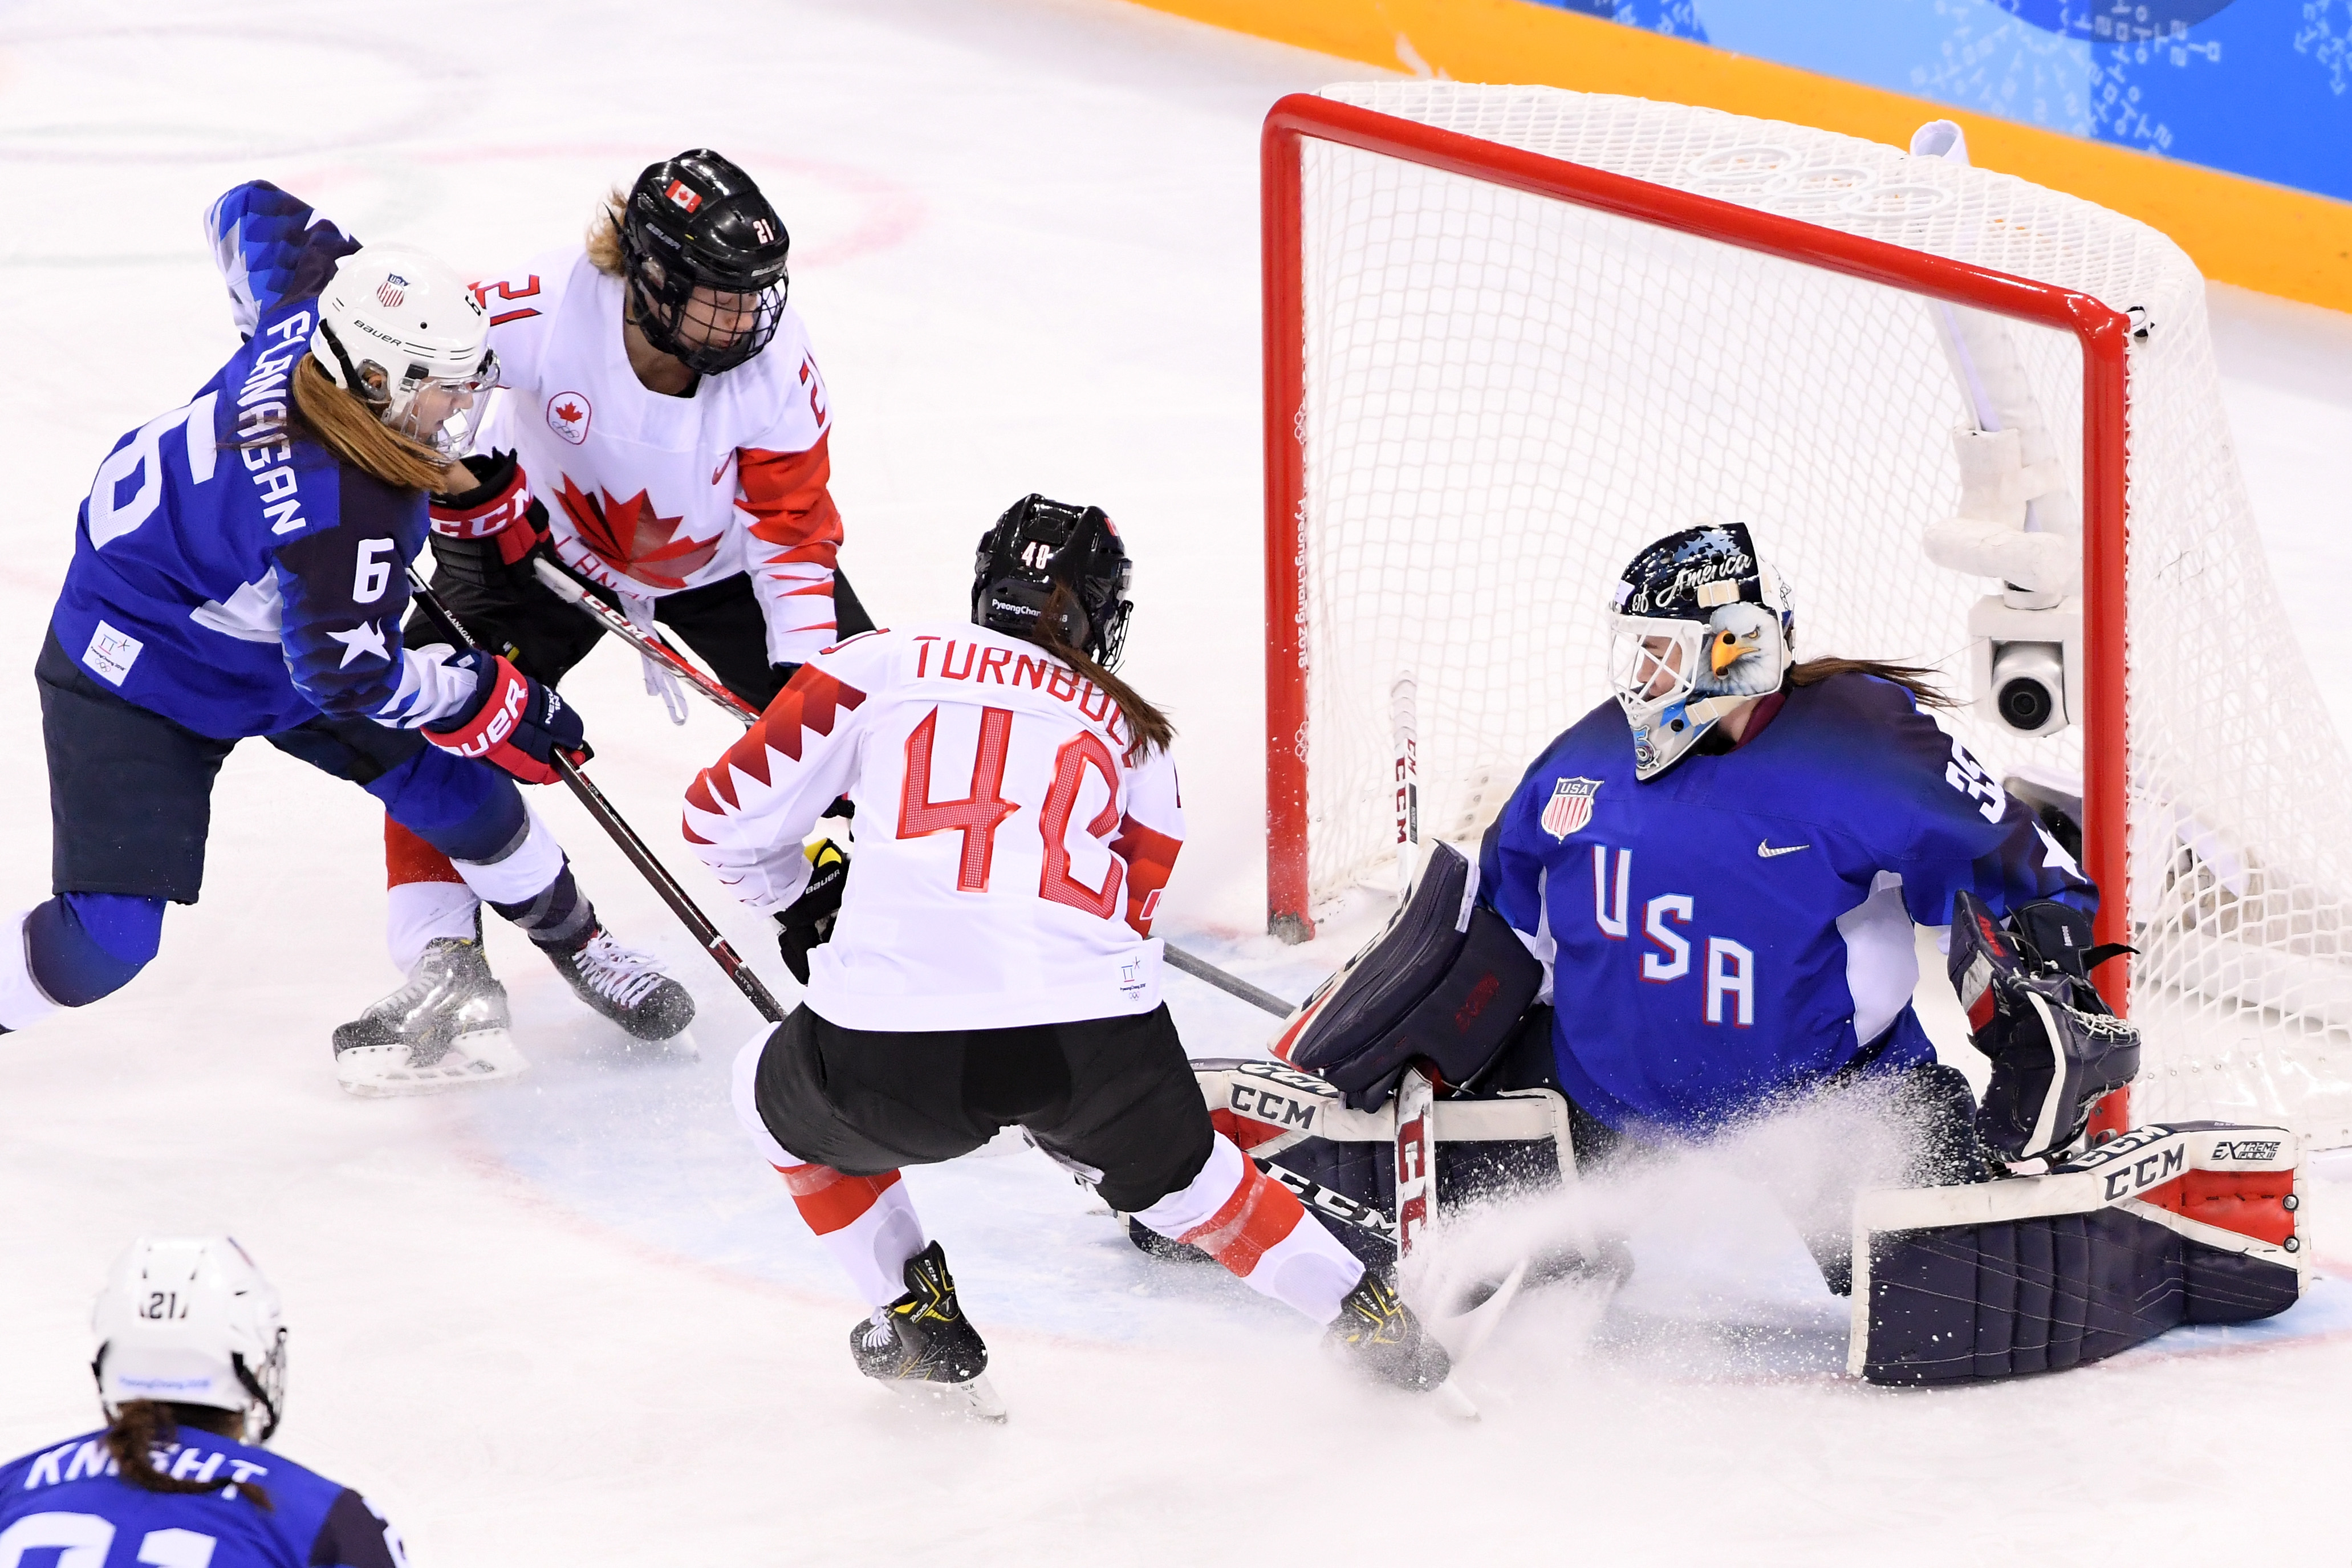 Madeline Rooney #35 of the United States tends goal against Blayre Turnbull #40 and Haley Irwin #21 of Canada in the first period during the Women's Gold Medal Game on day thirteen of the PyeongChang 2018 Winter Olympic Games at Gangneung Hockey Centre on February 22, 2018 in Gangneung, South Korea. (Harry How—Getty Images)